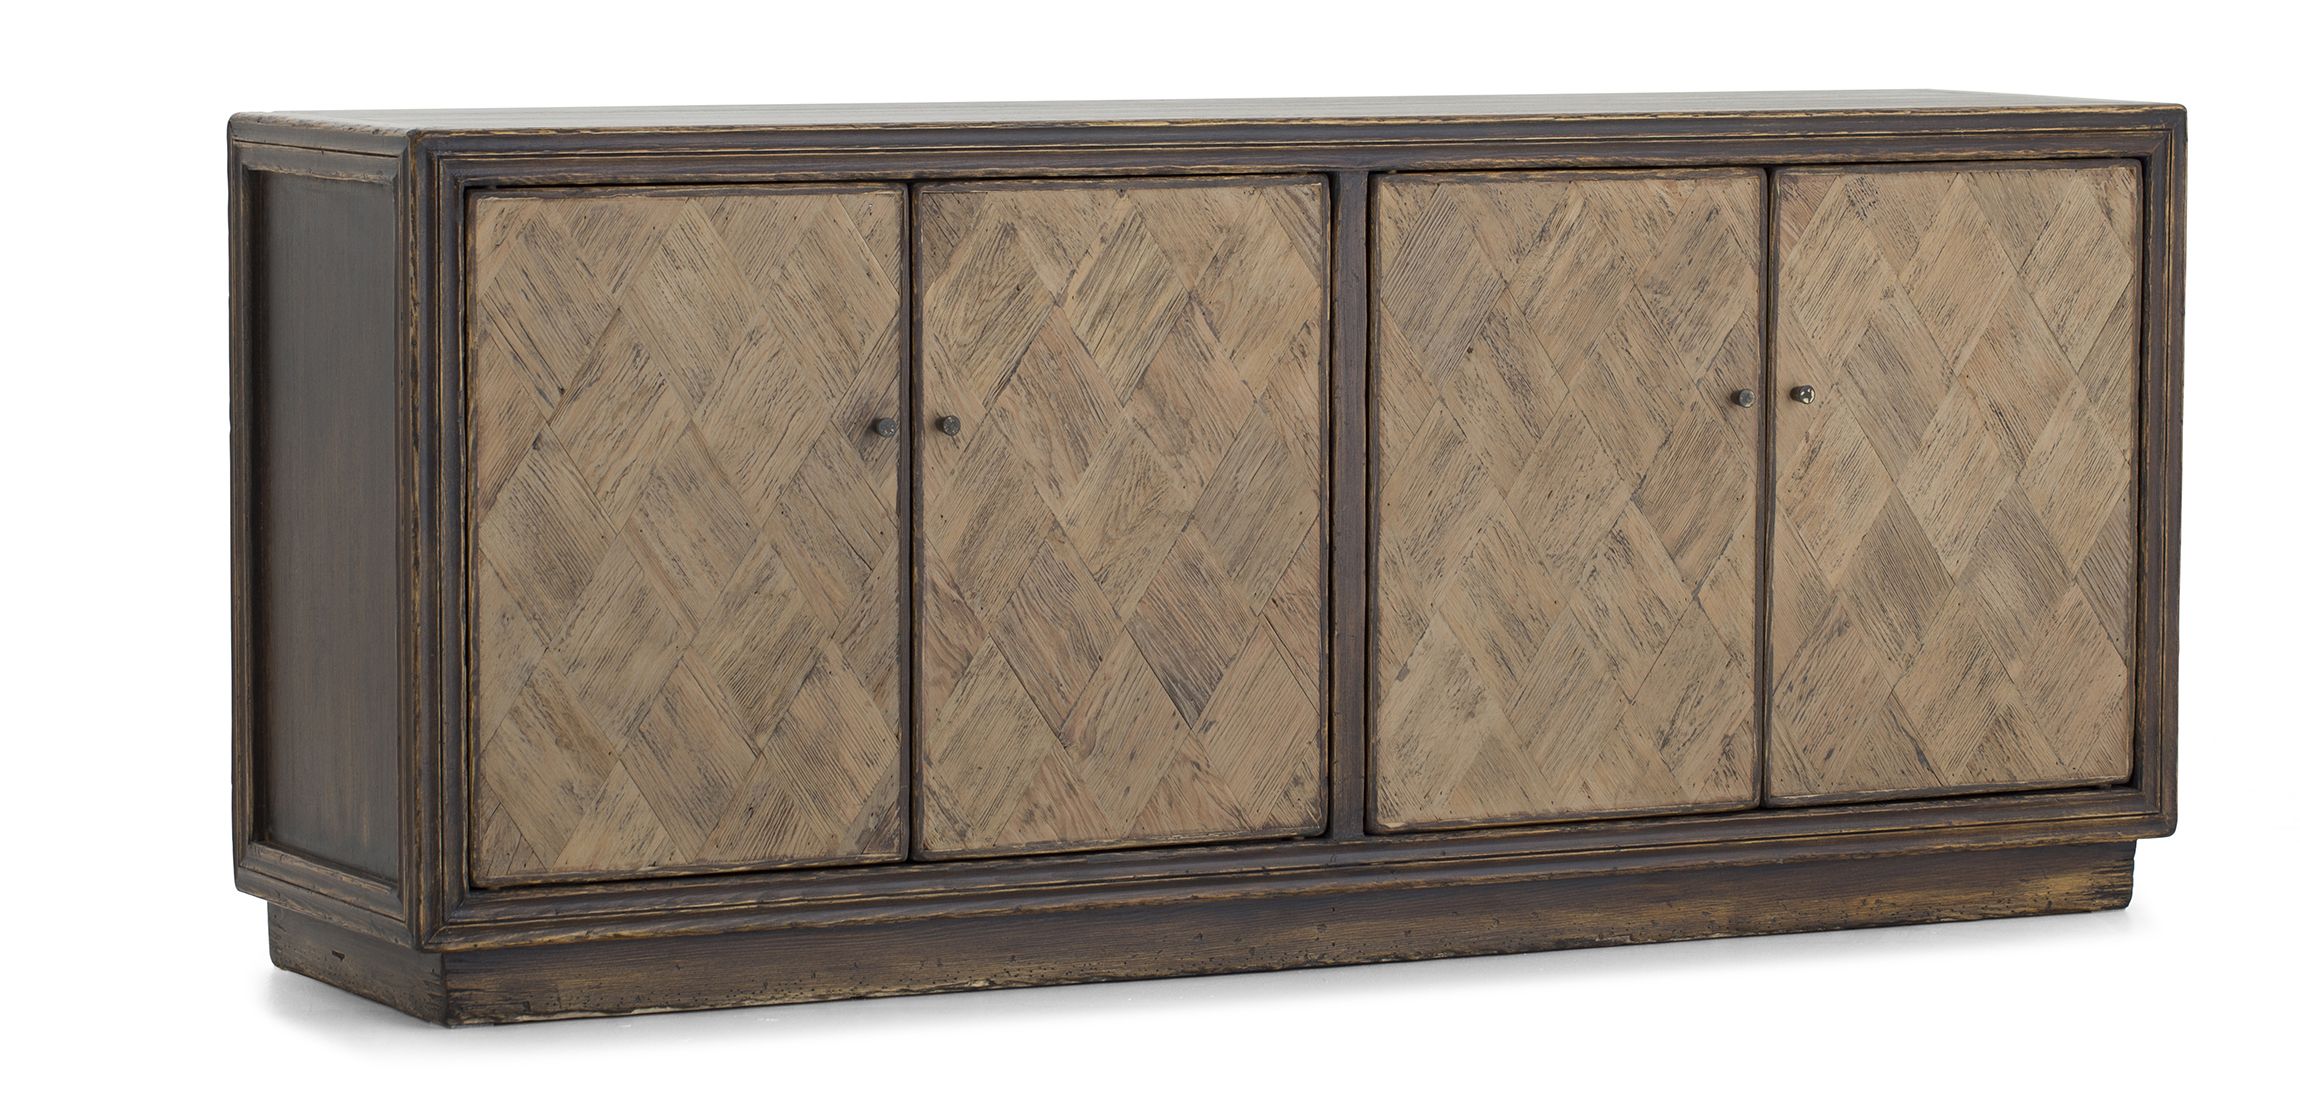 Kaye – Sideboard, 4 Doors | Flamant Throughout Most Recently Released Adkins Sideboards (View 14 of 20)